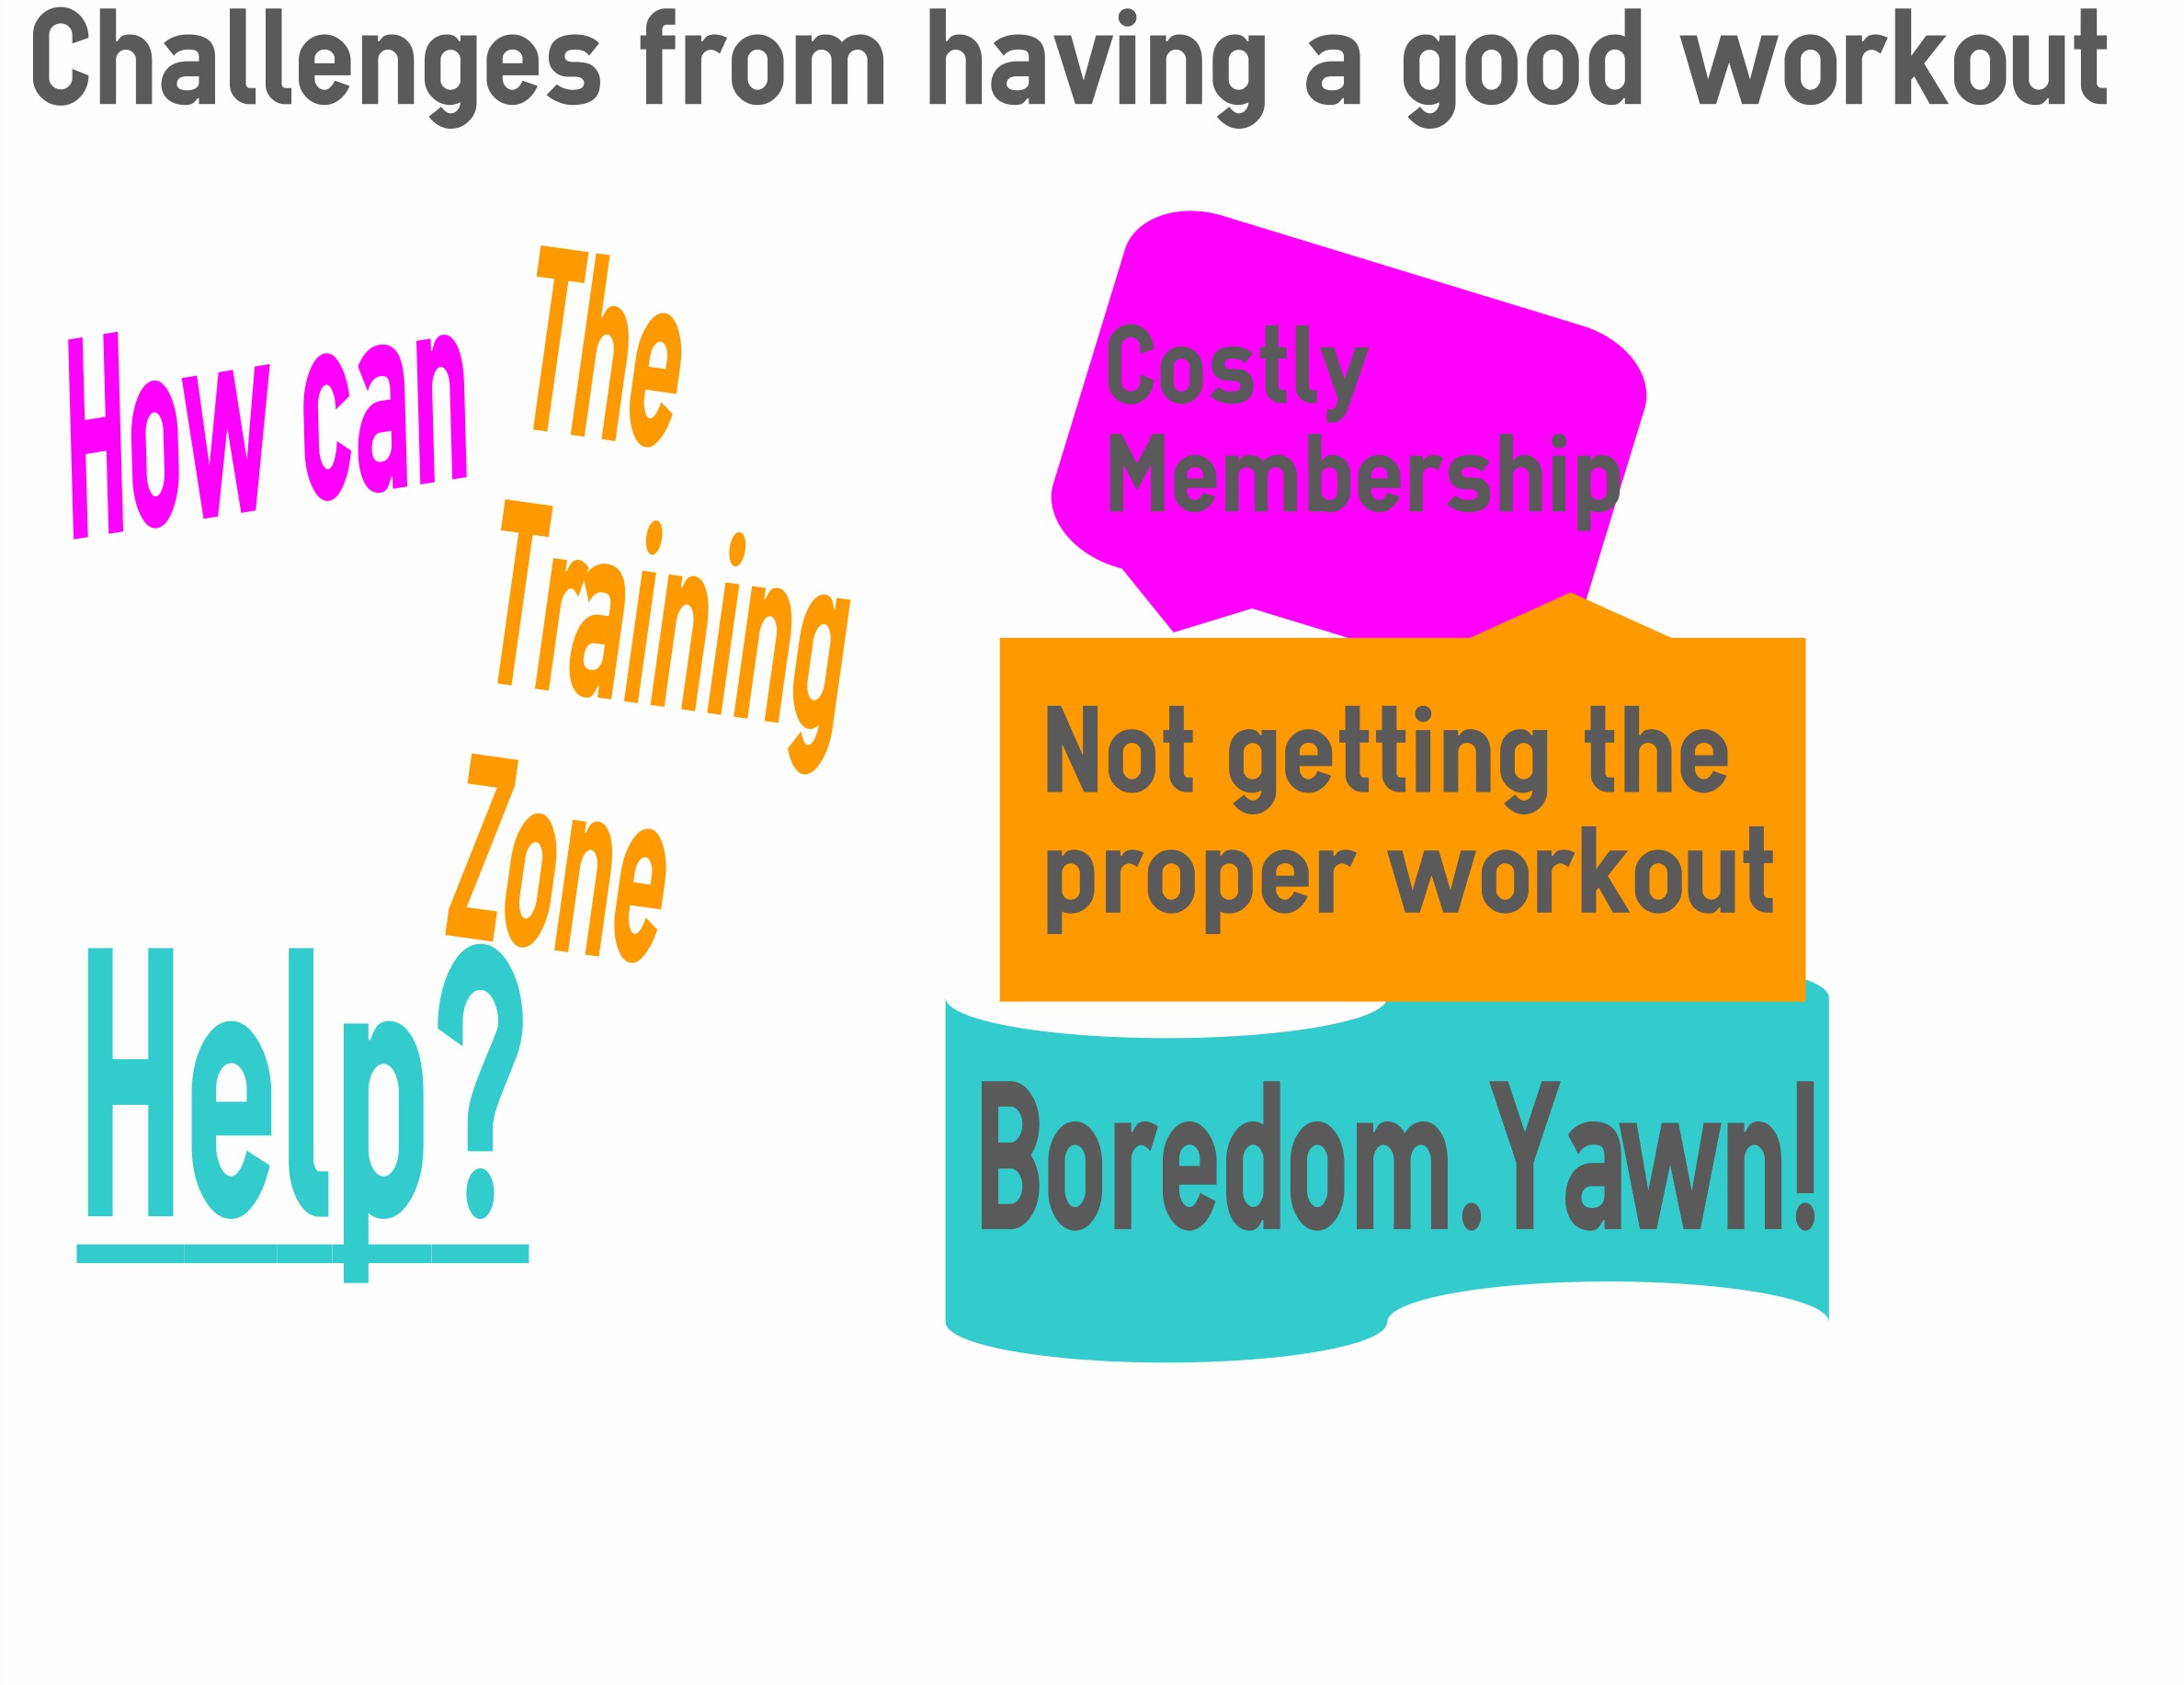 Challenges from working out costly membership bored getting the proper workout